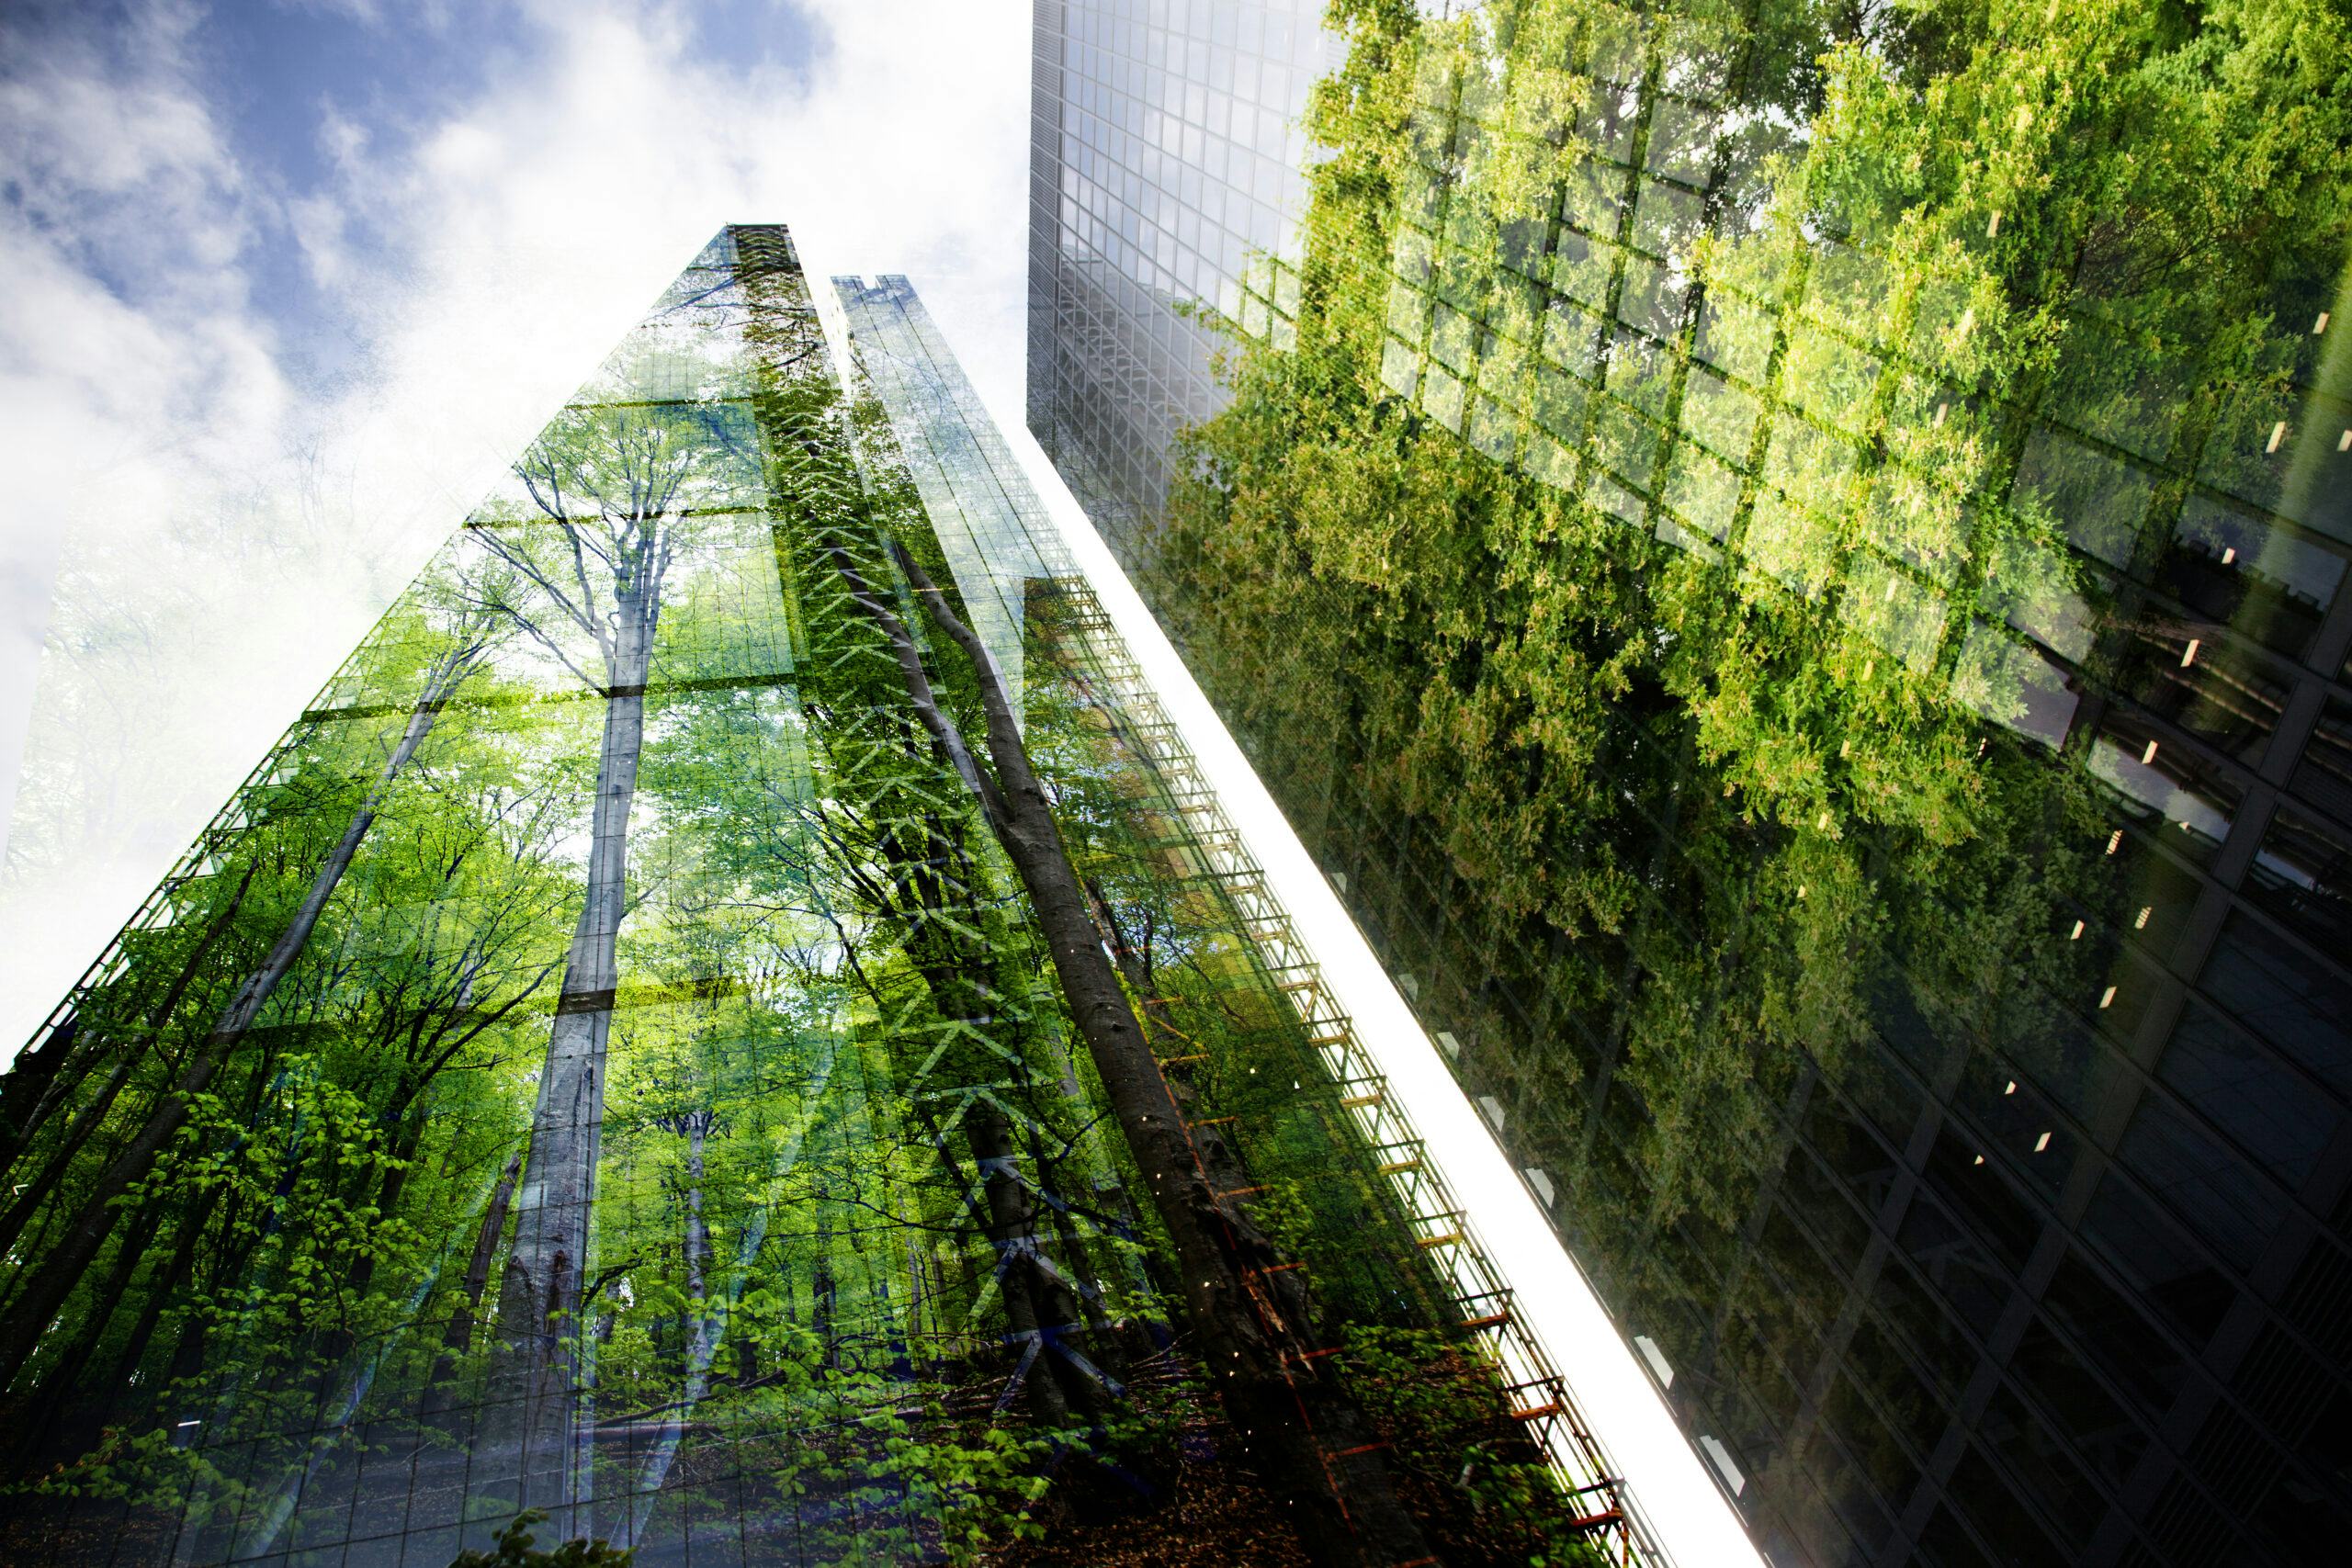 green city - double exposure of lush green forest and modern skyscrapers windows